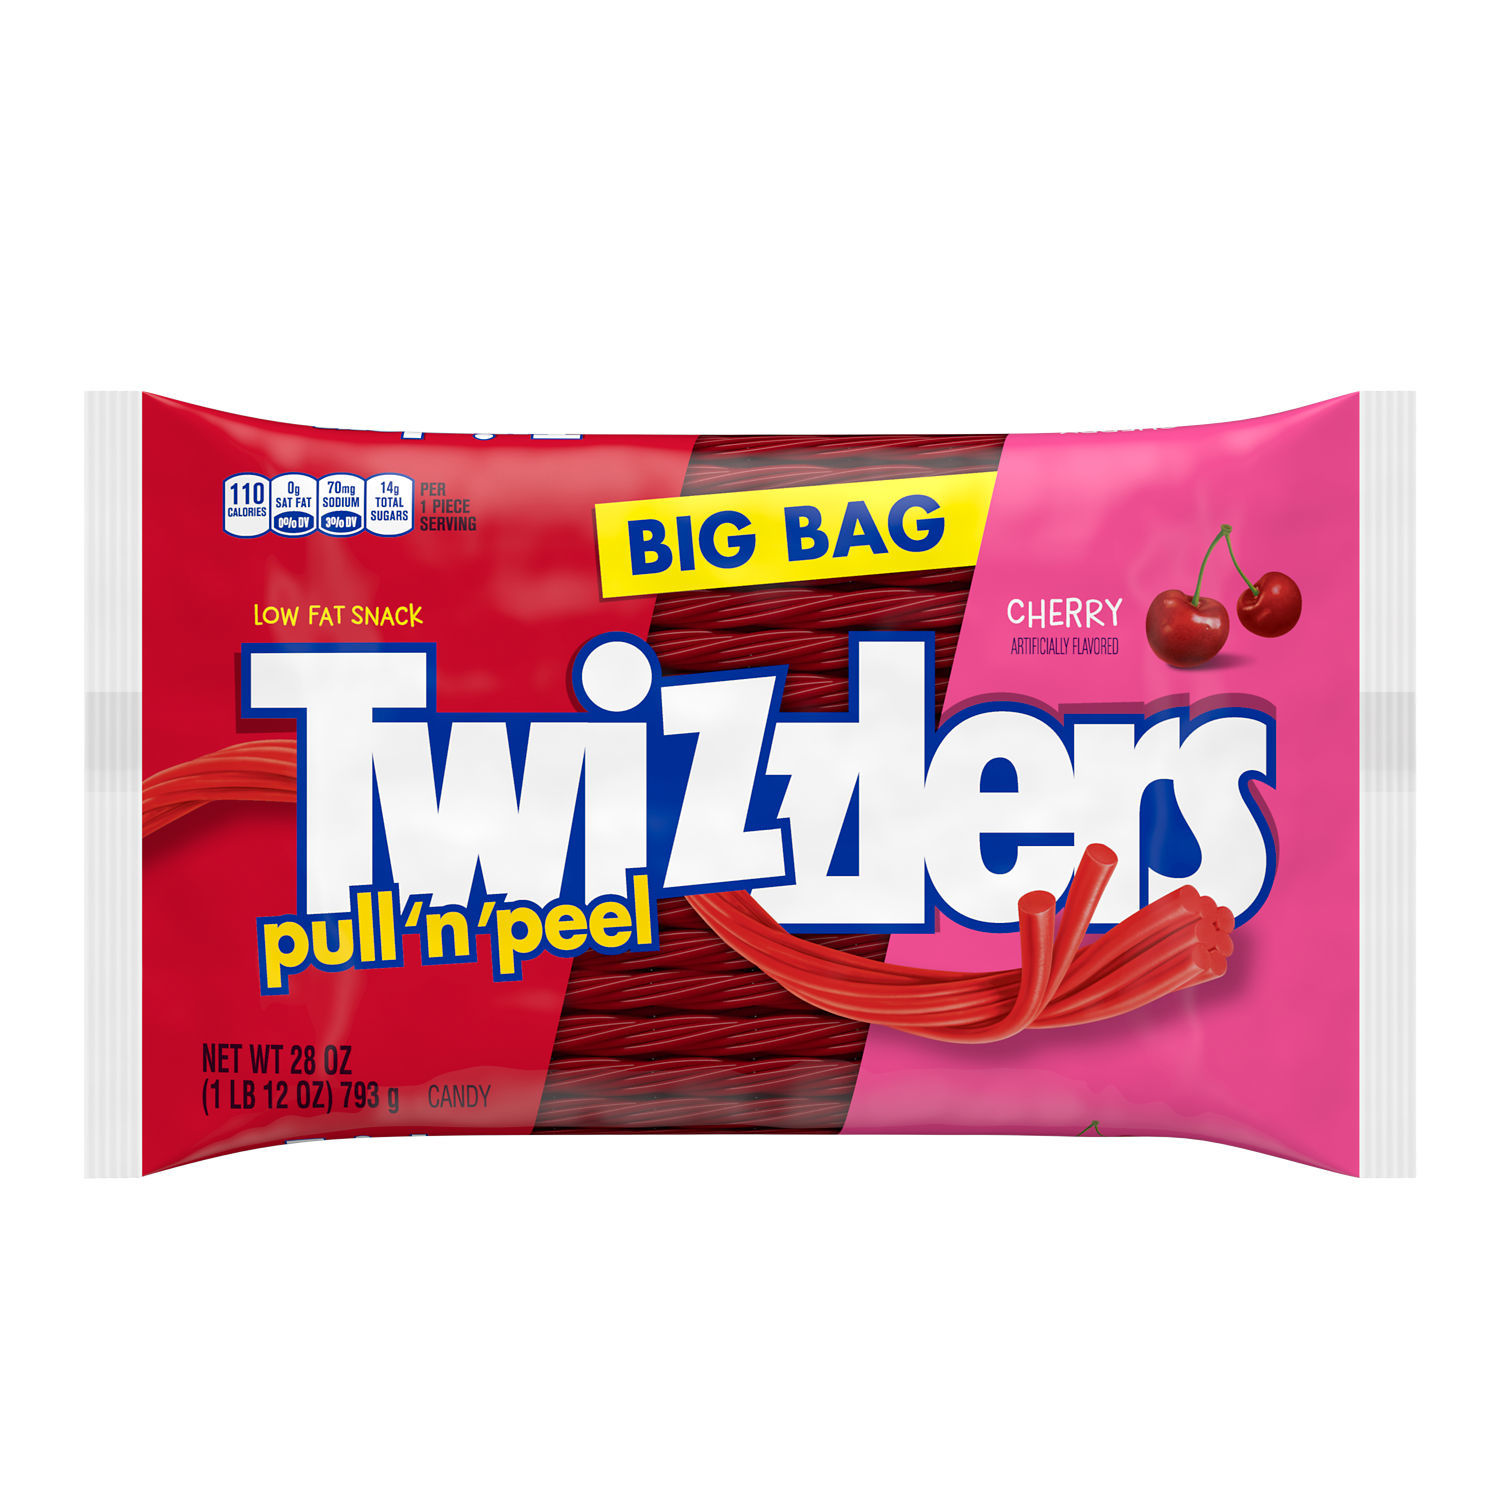 Twizzlers Pull 'N' Peel Cherry Flavored Licorice Style Low Fat Candy, Big Bag 28 oz - image 2 of 9